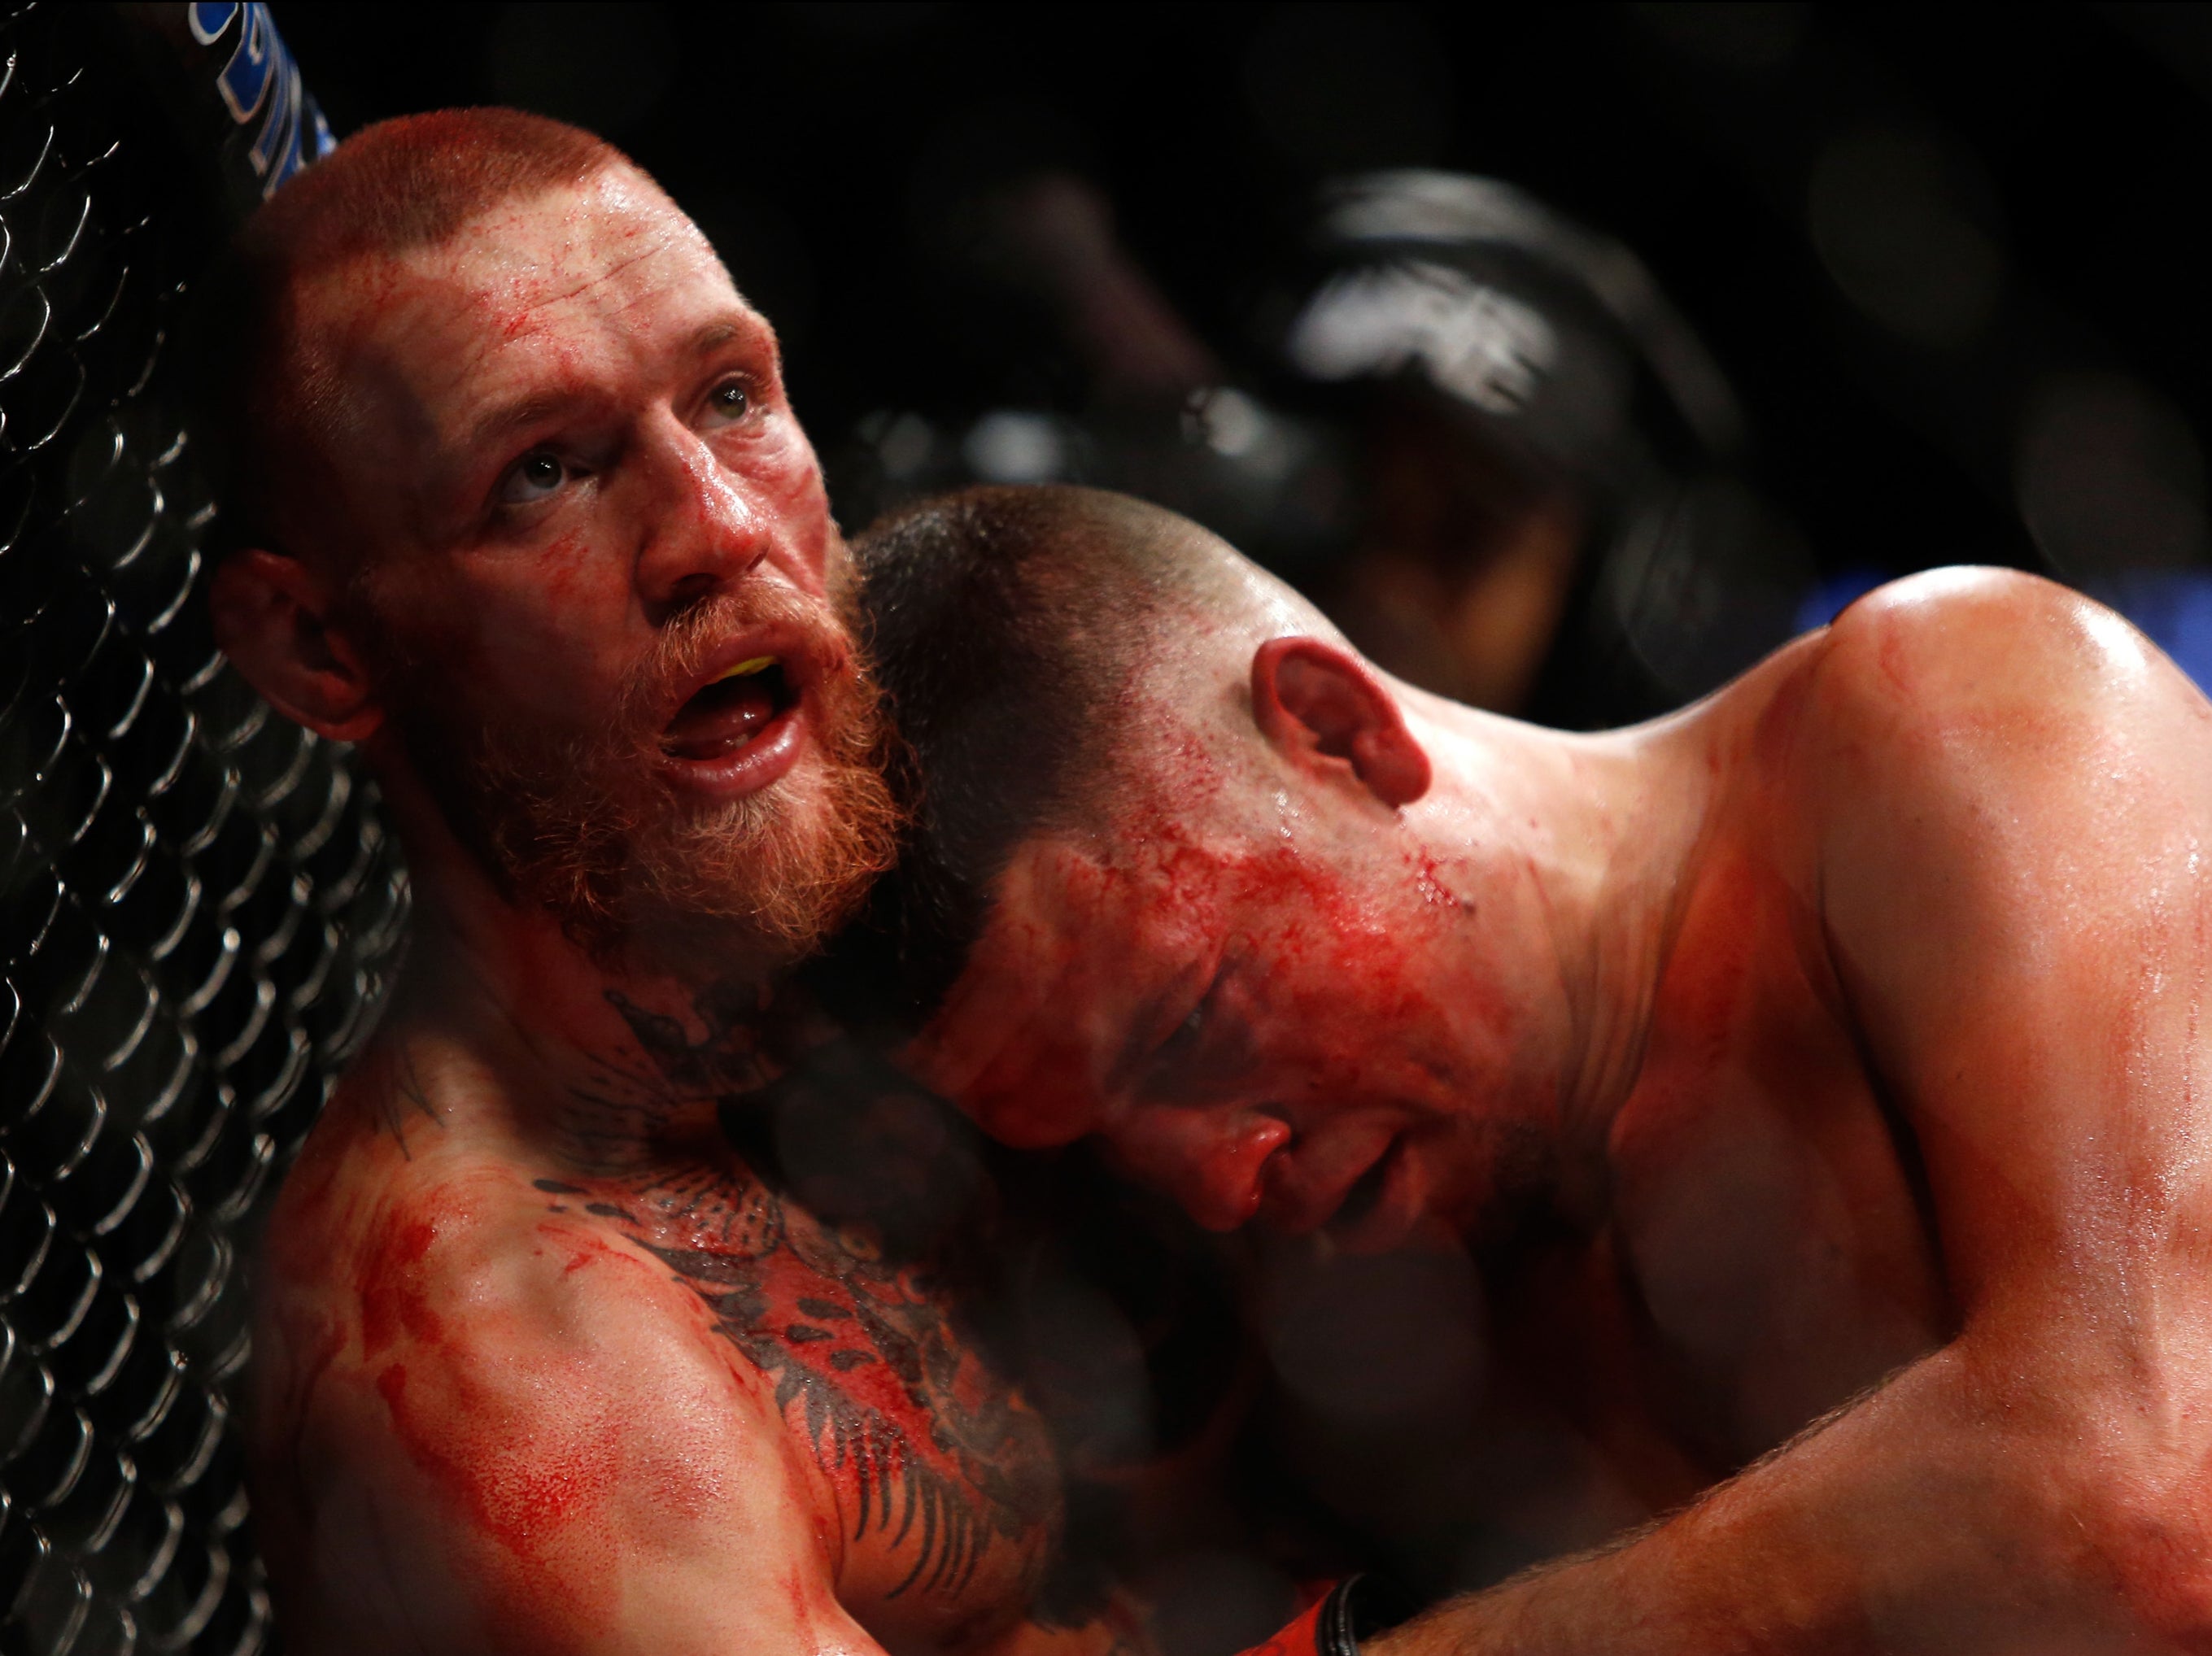 Conor McGregor (left) and Nate Diaz during their rematch in August 2016